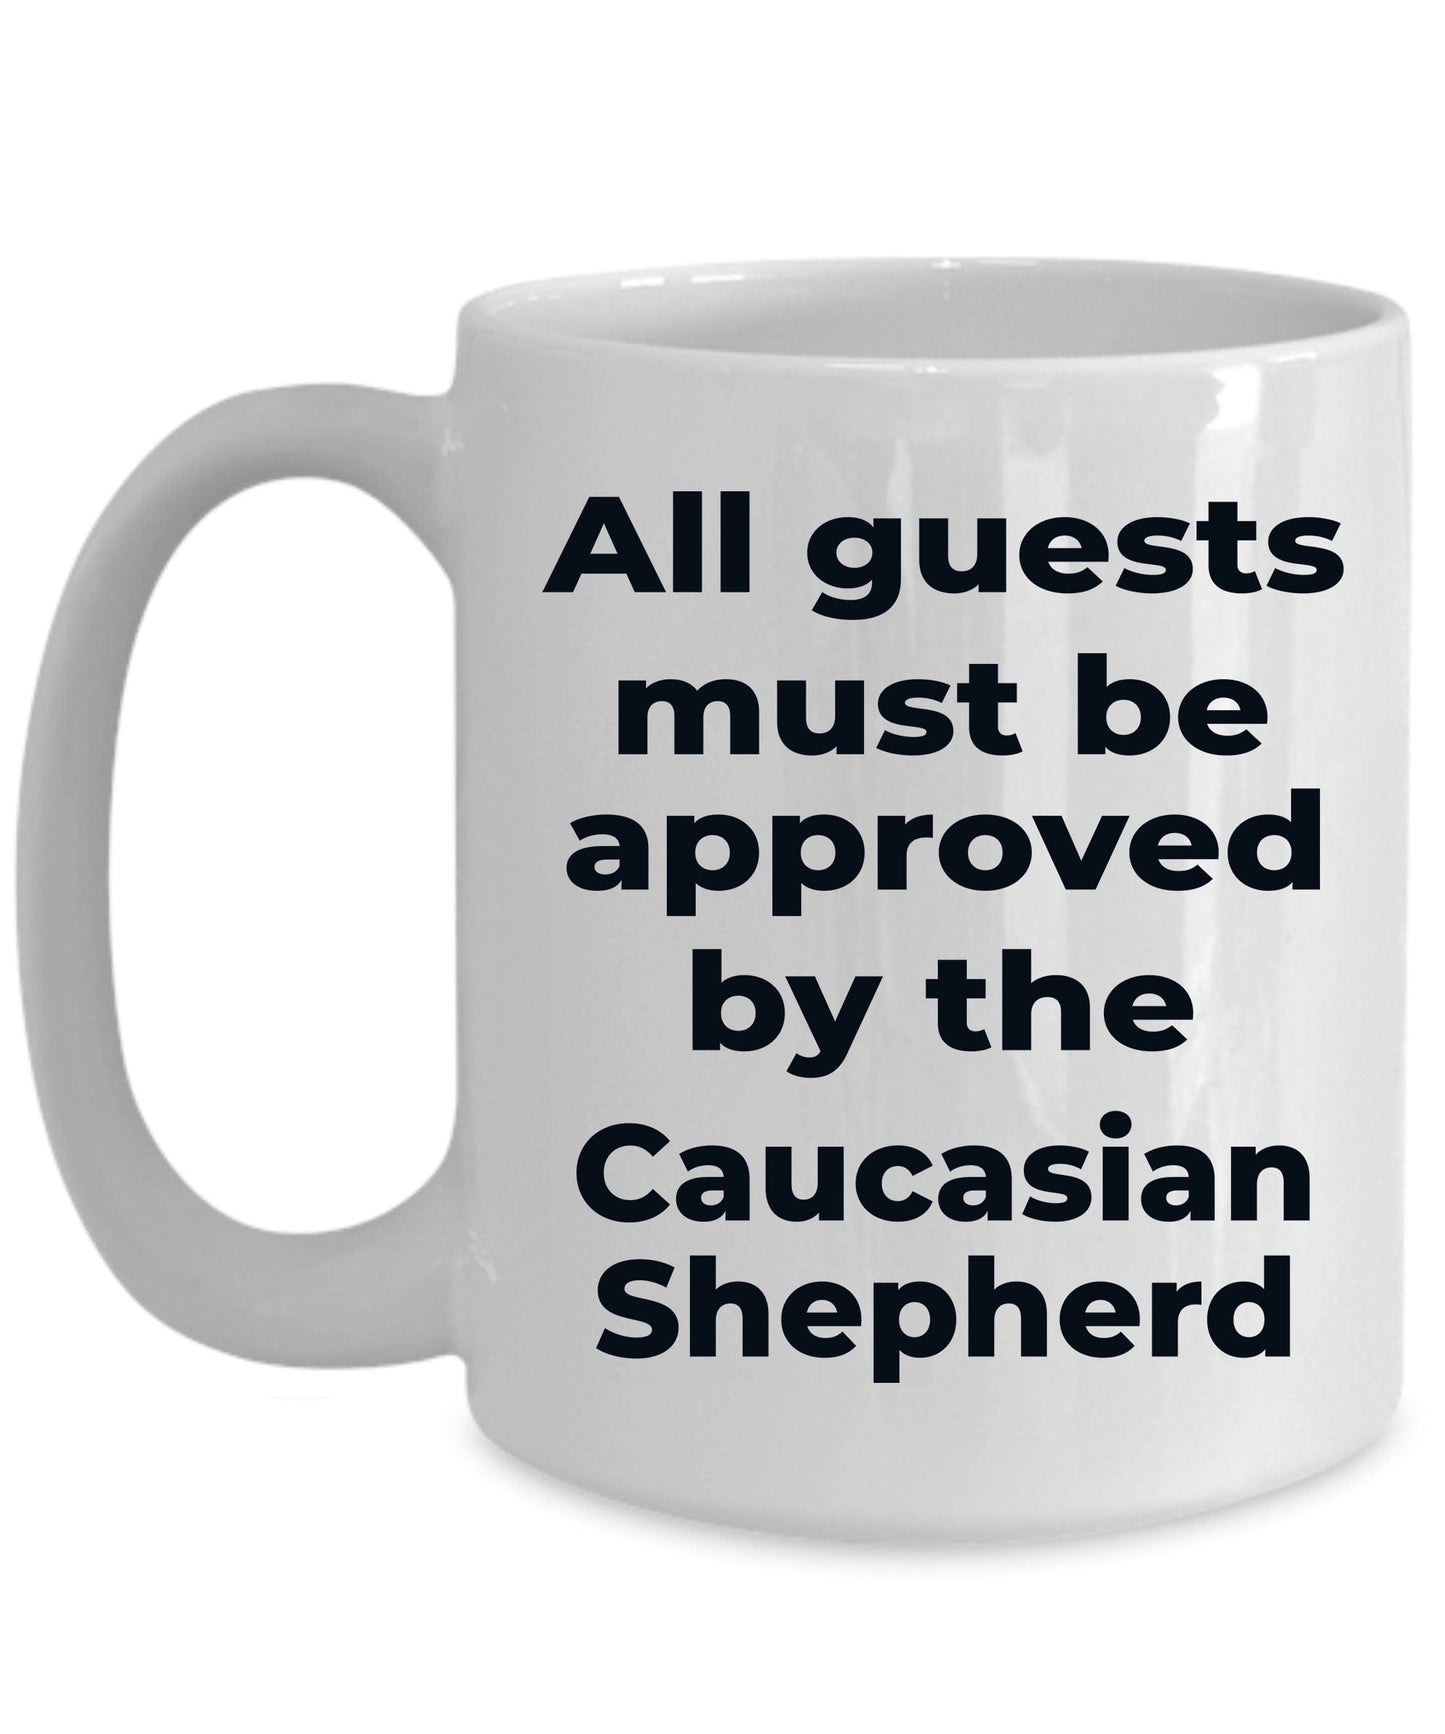 Caucasian Shepherd Dog Coffee Mug - All guests must be approved by the Caucasian Shepherd